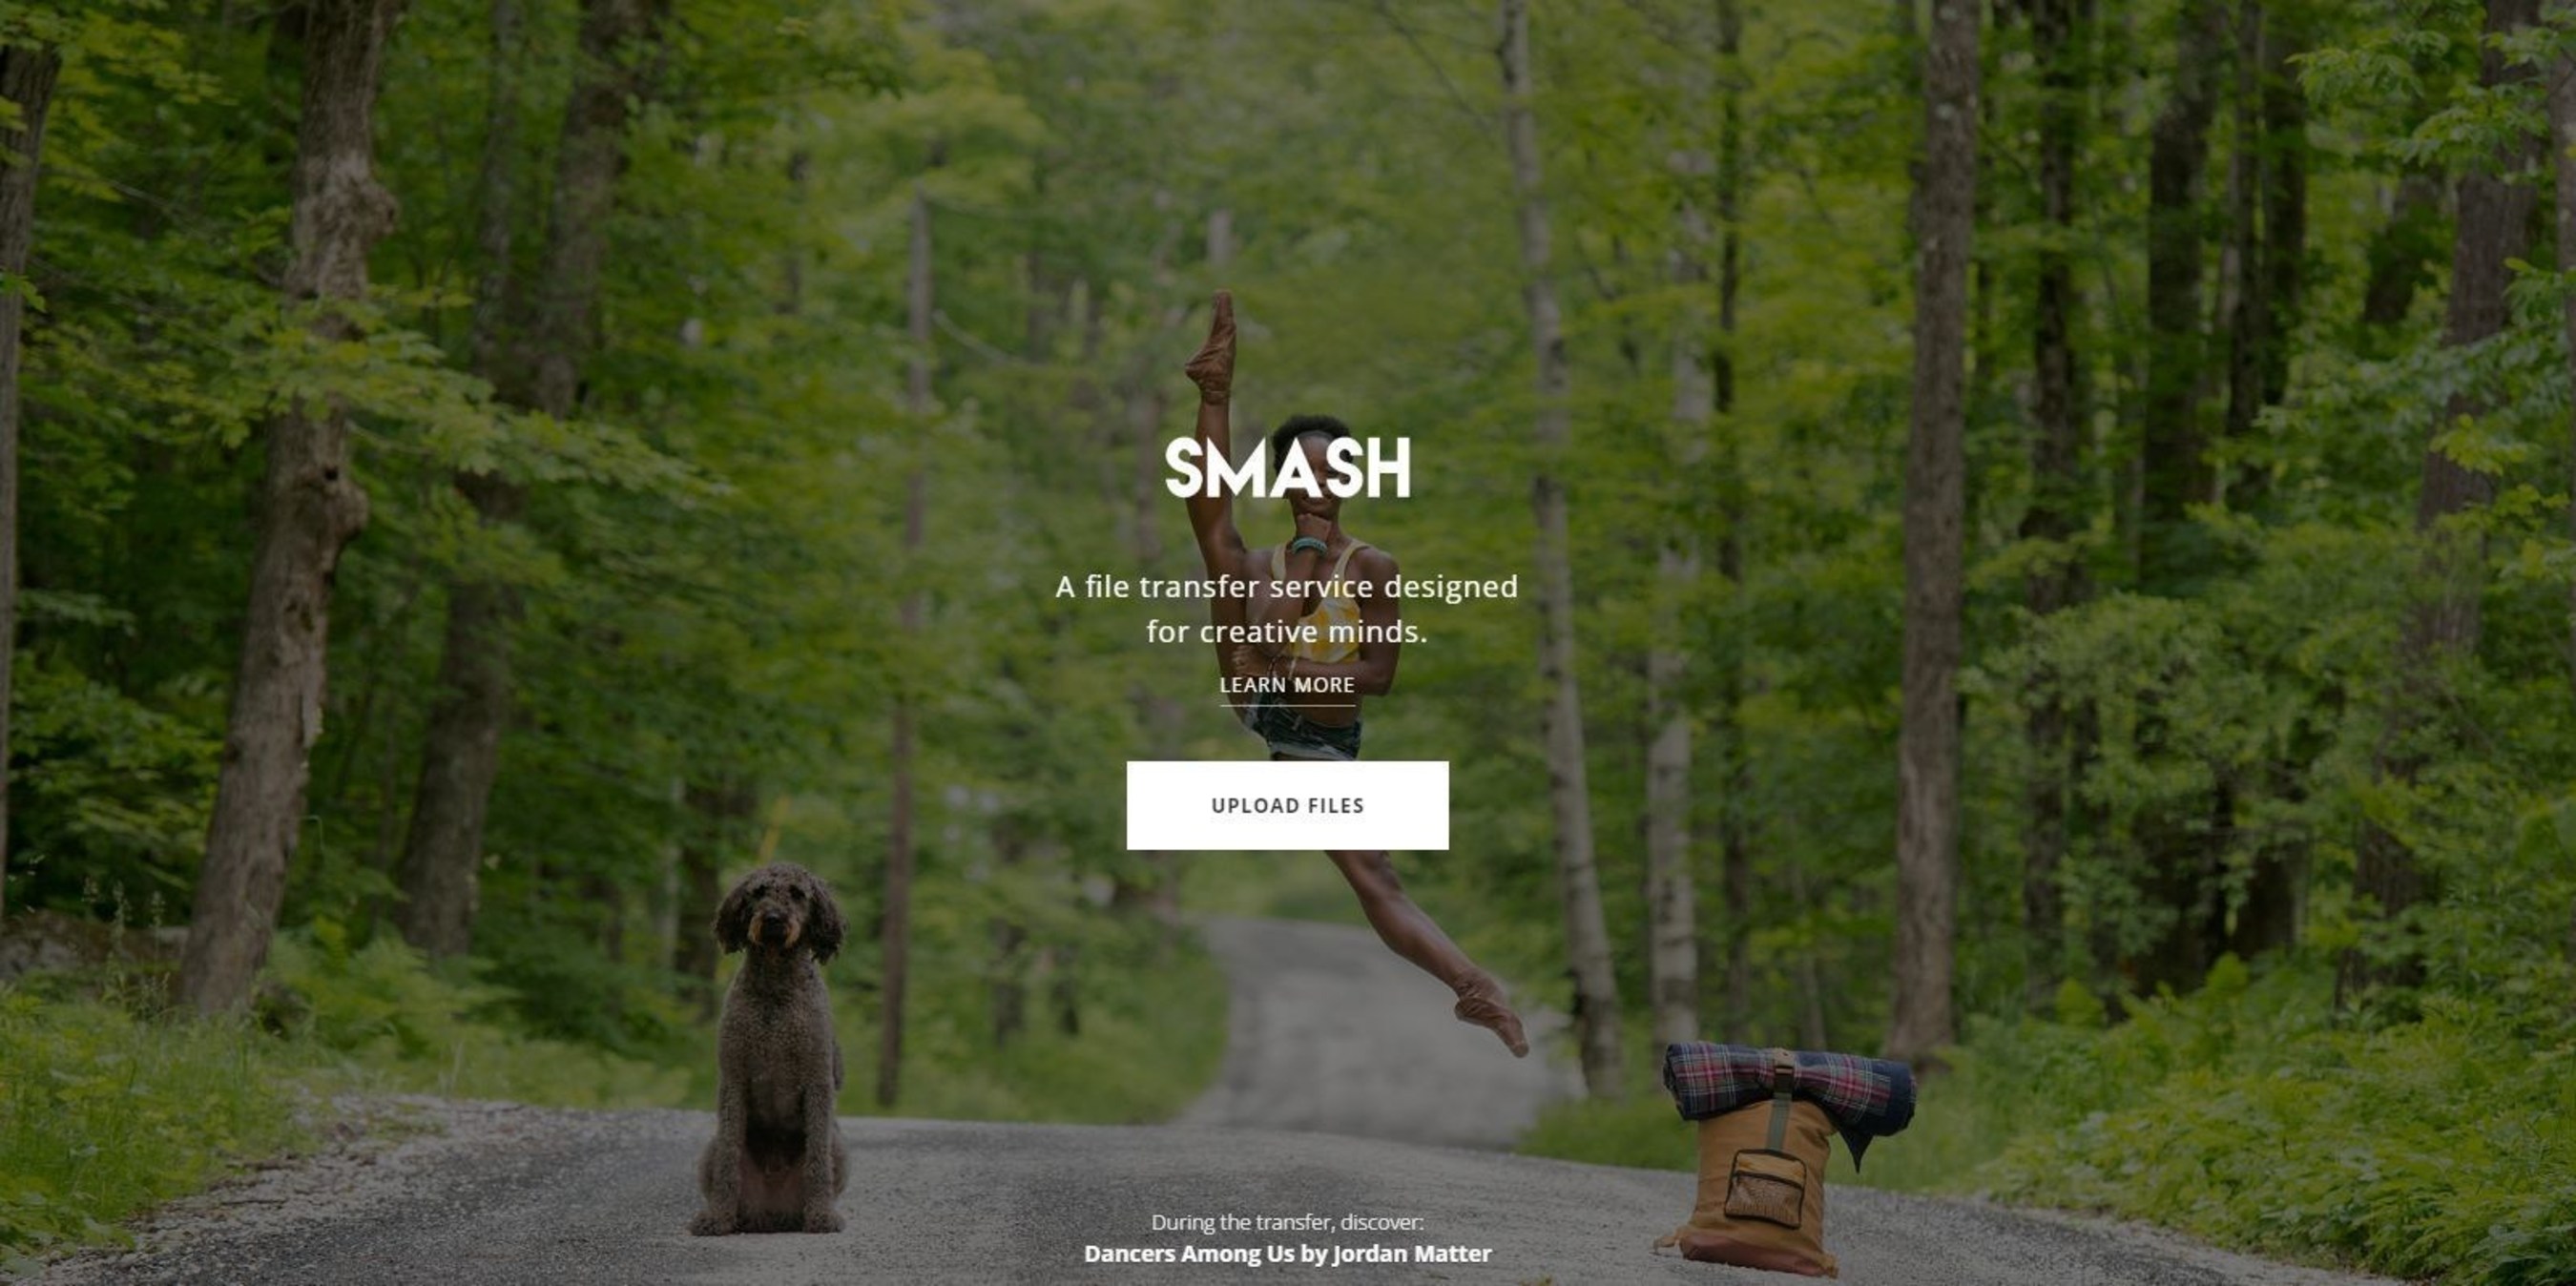 Smash Replaces Traditional File Transfer for the Creative